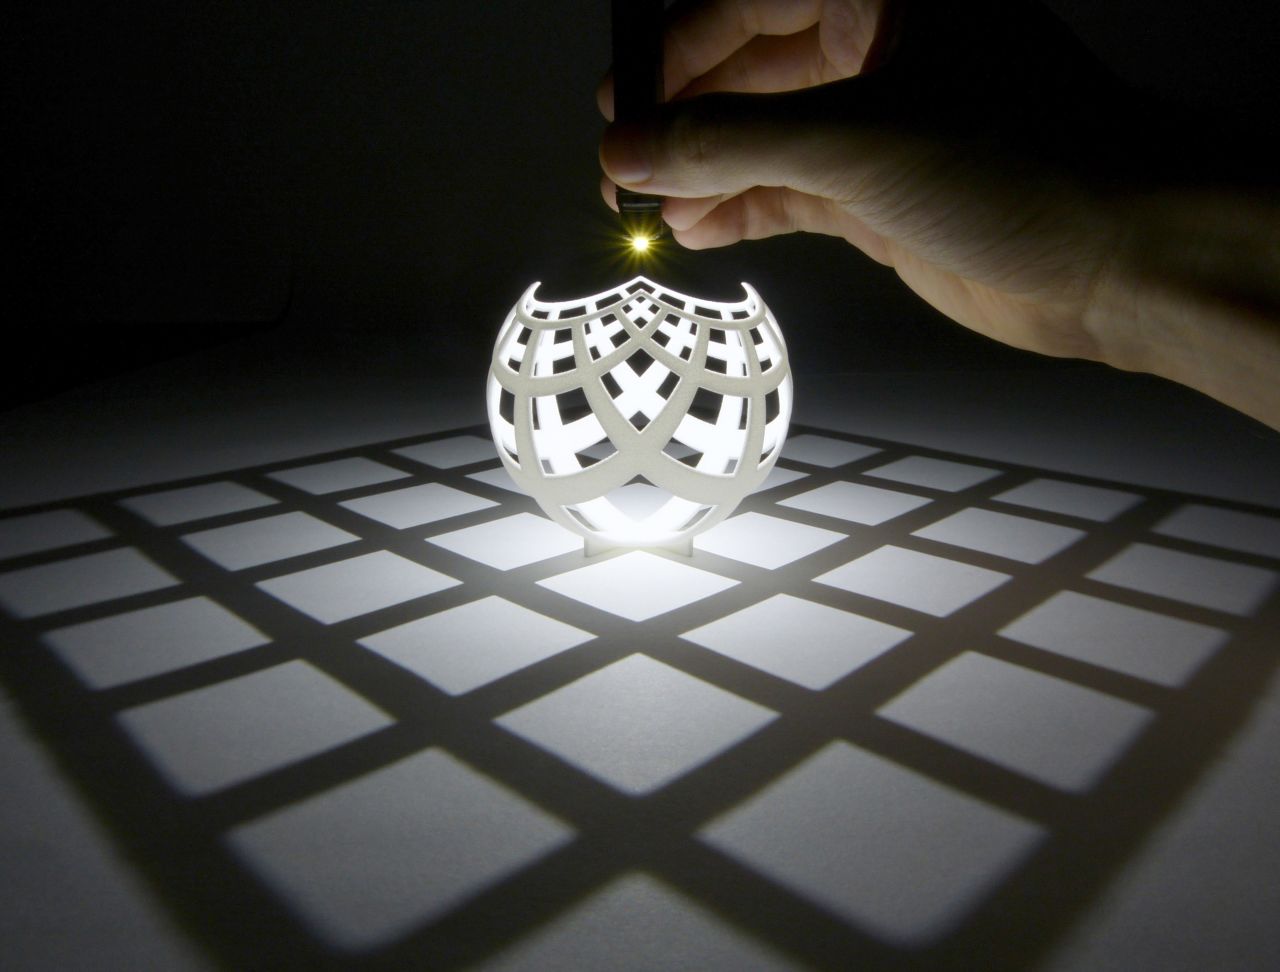 These shadow sculptures, by mathematicians <a href="http://www.shapeways.com/shops/henryseg" target="_blank" target="_blank">Henry Segerman and Saul Schleimer</a>, make use of a phenomenon called "stereographic projection," first used <a href="http://www.theguardian.com/science/alexs-adventures-in-numberland/2014/oct/30/pumpkin-geometry-stunning-shadow-sculptures-that-illuminate-an-ancient-mathematical-technique" target="_blank" target="_blank">to map the earth and the skies</a>.  